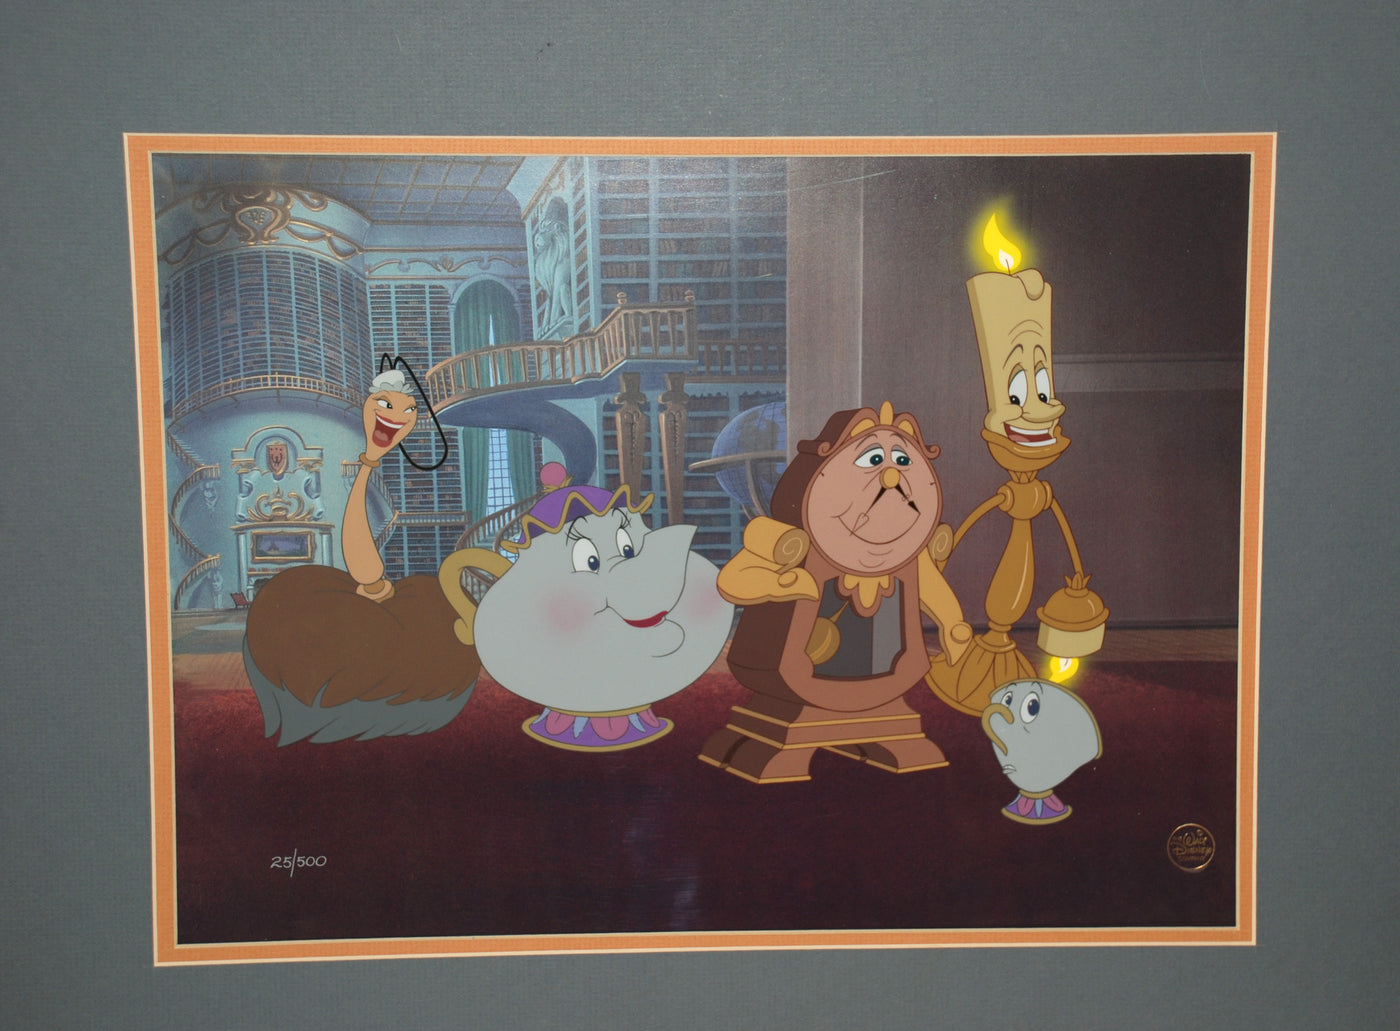 Disney Animation Limited Edition Cel "Wishing for Romance"